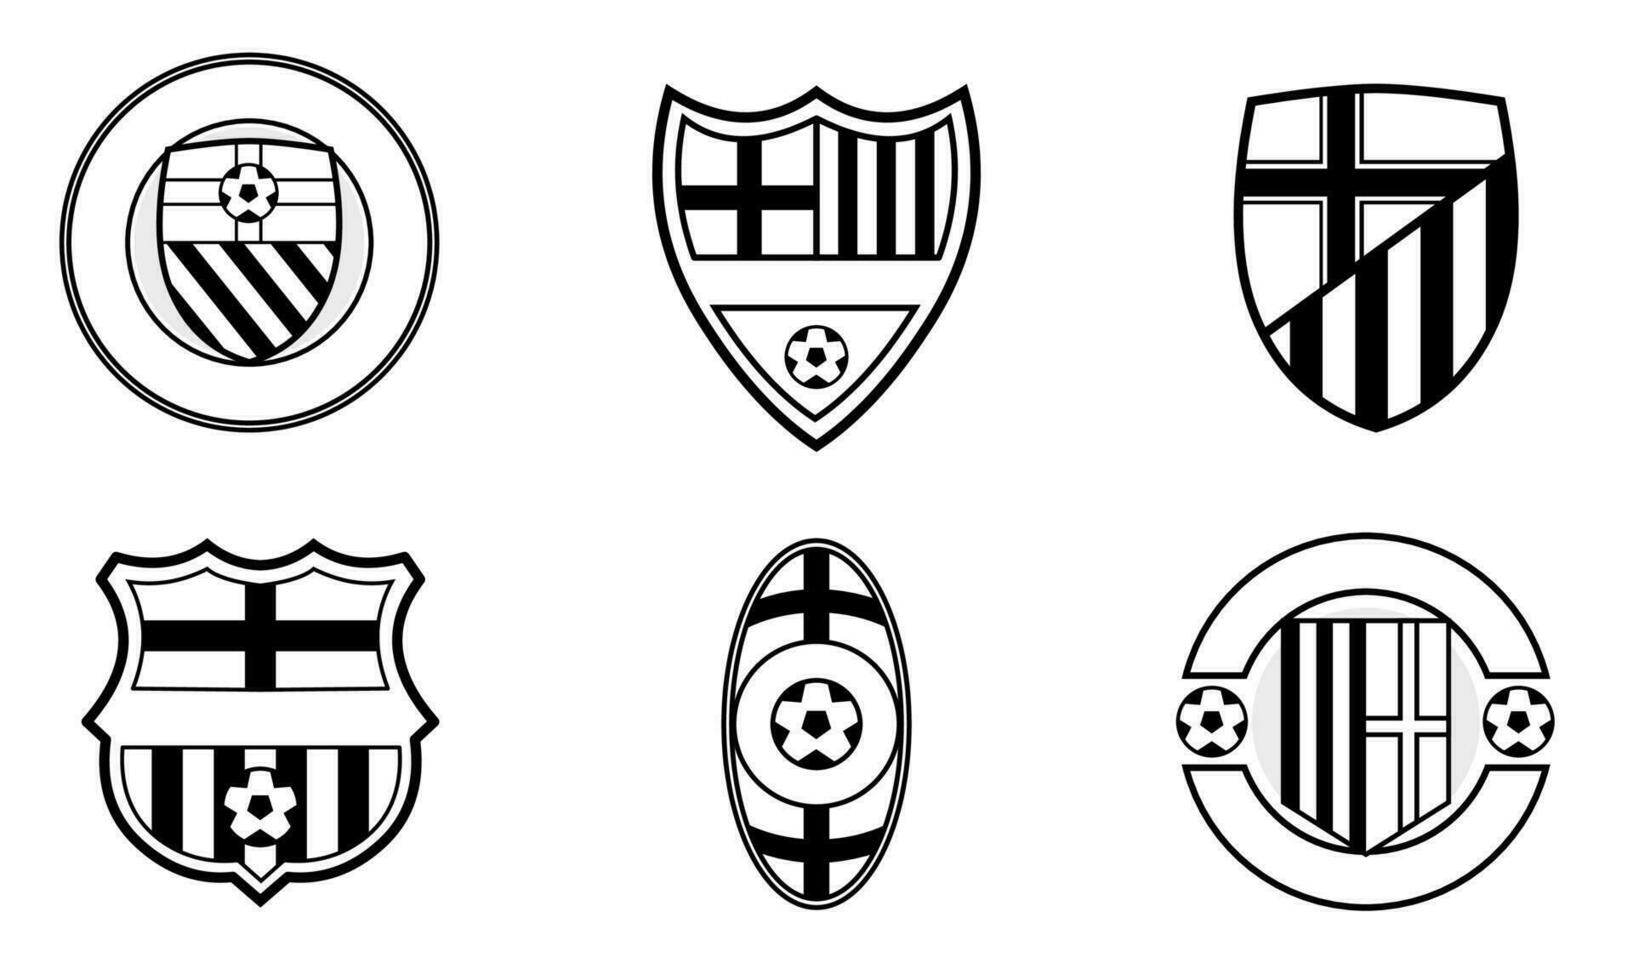 set bundle football club logo badges for your team, isolated on white backkground vector